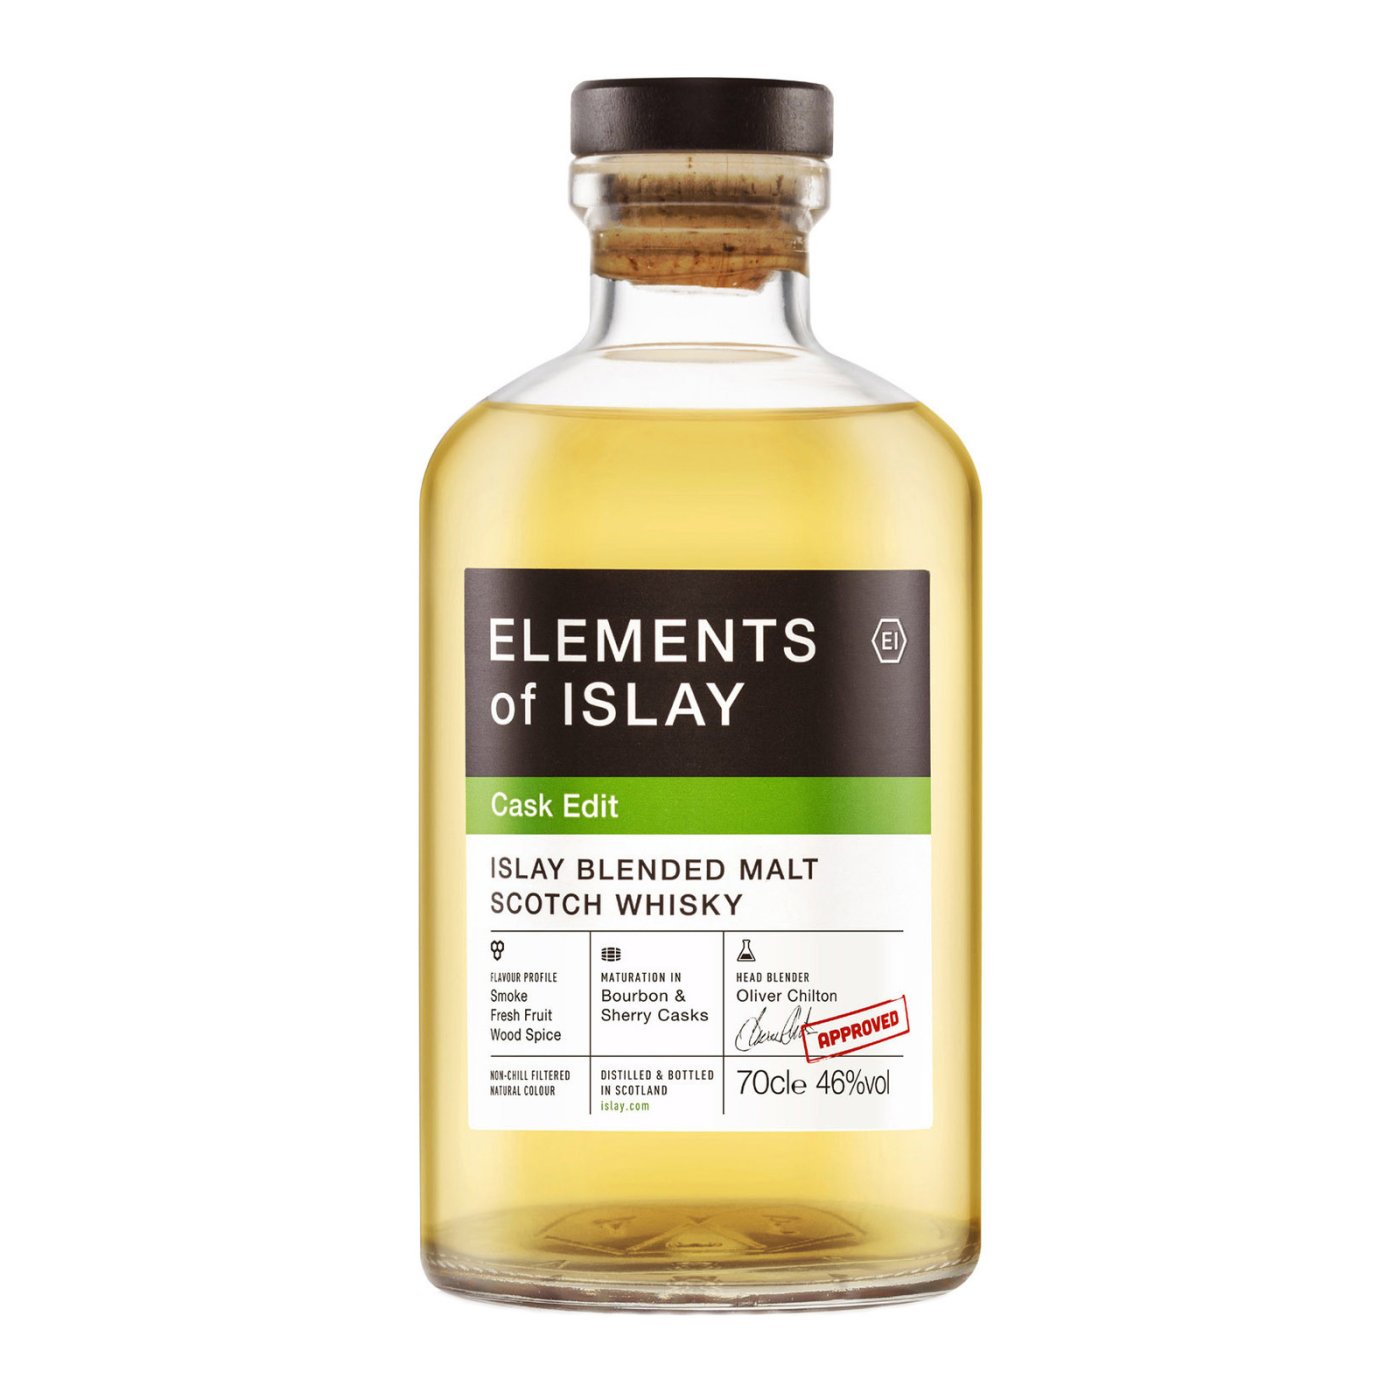 Elements of Islay - Cask Edit 70cl